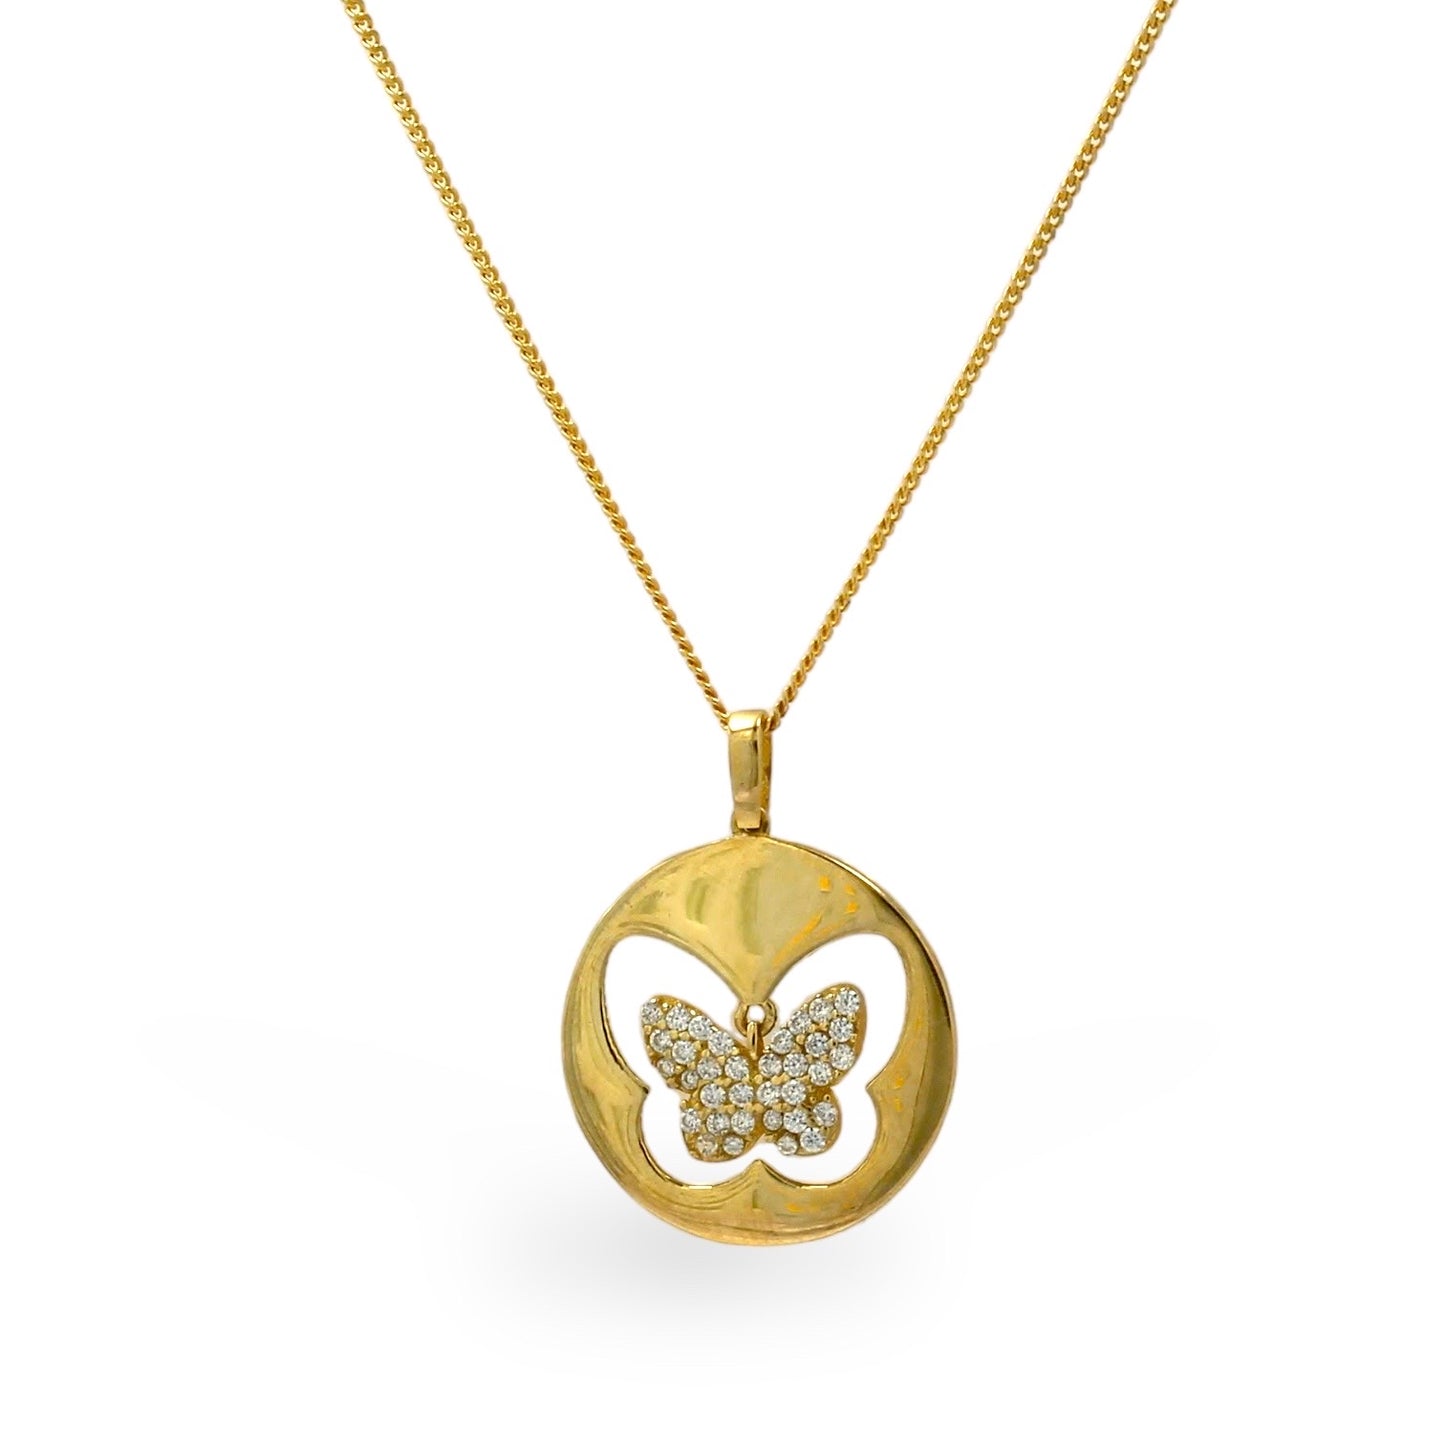 10k Yellow gold butterfly Floating pendant necklace-02